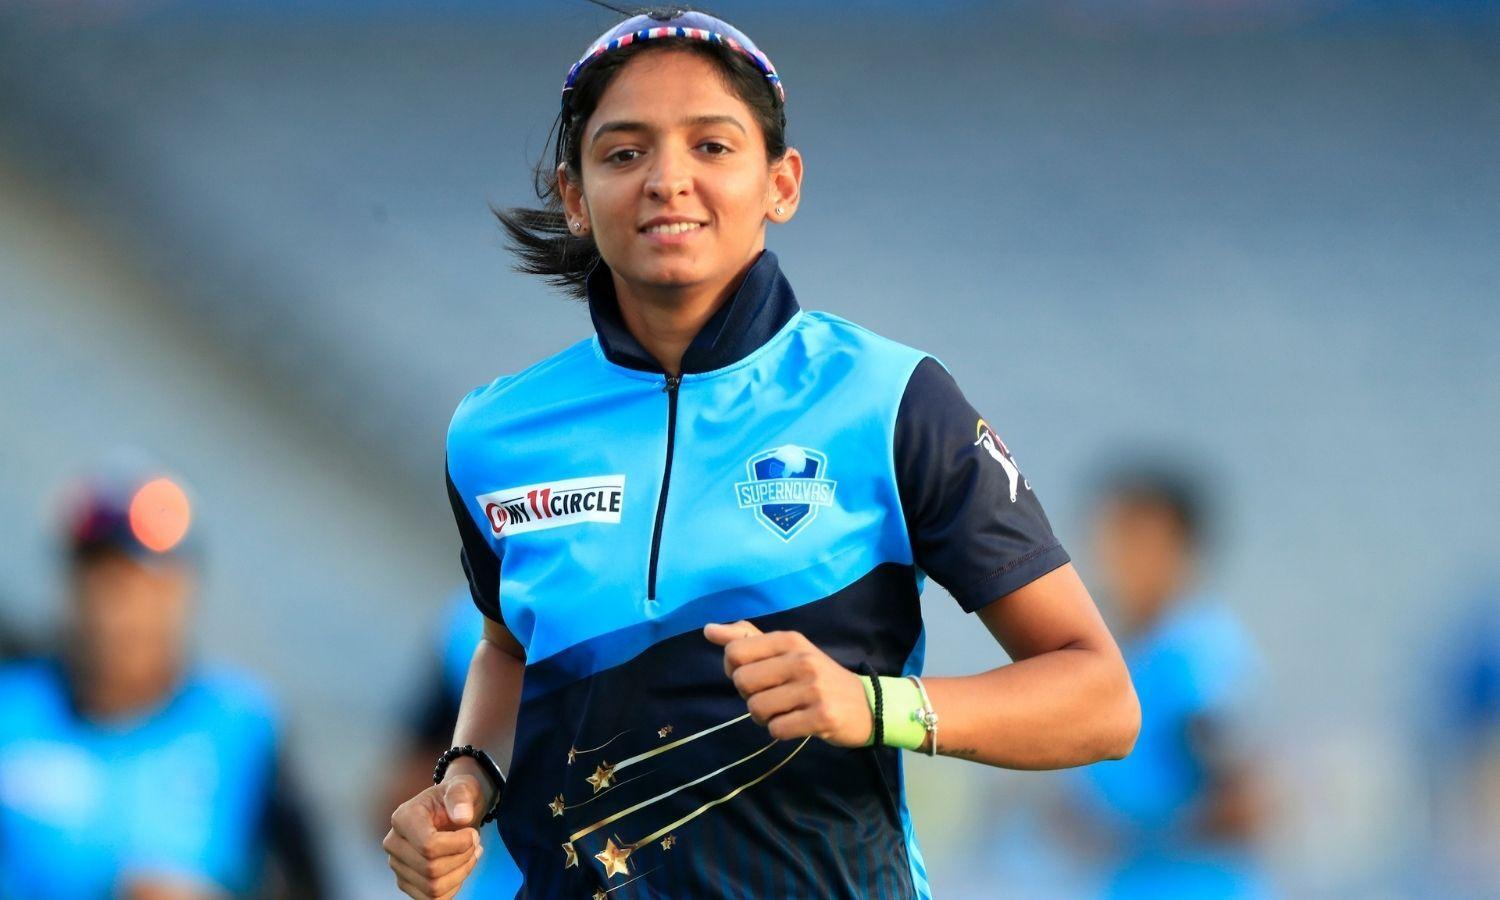 We knew game could go down to the wire: Harmanpreet Kaur